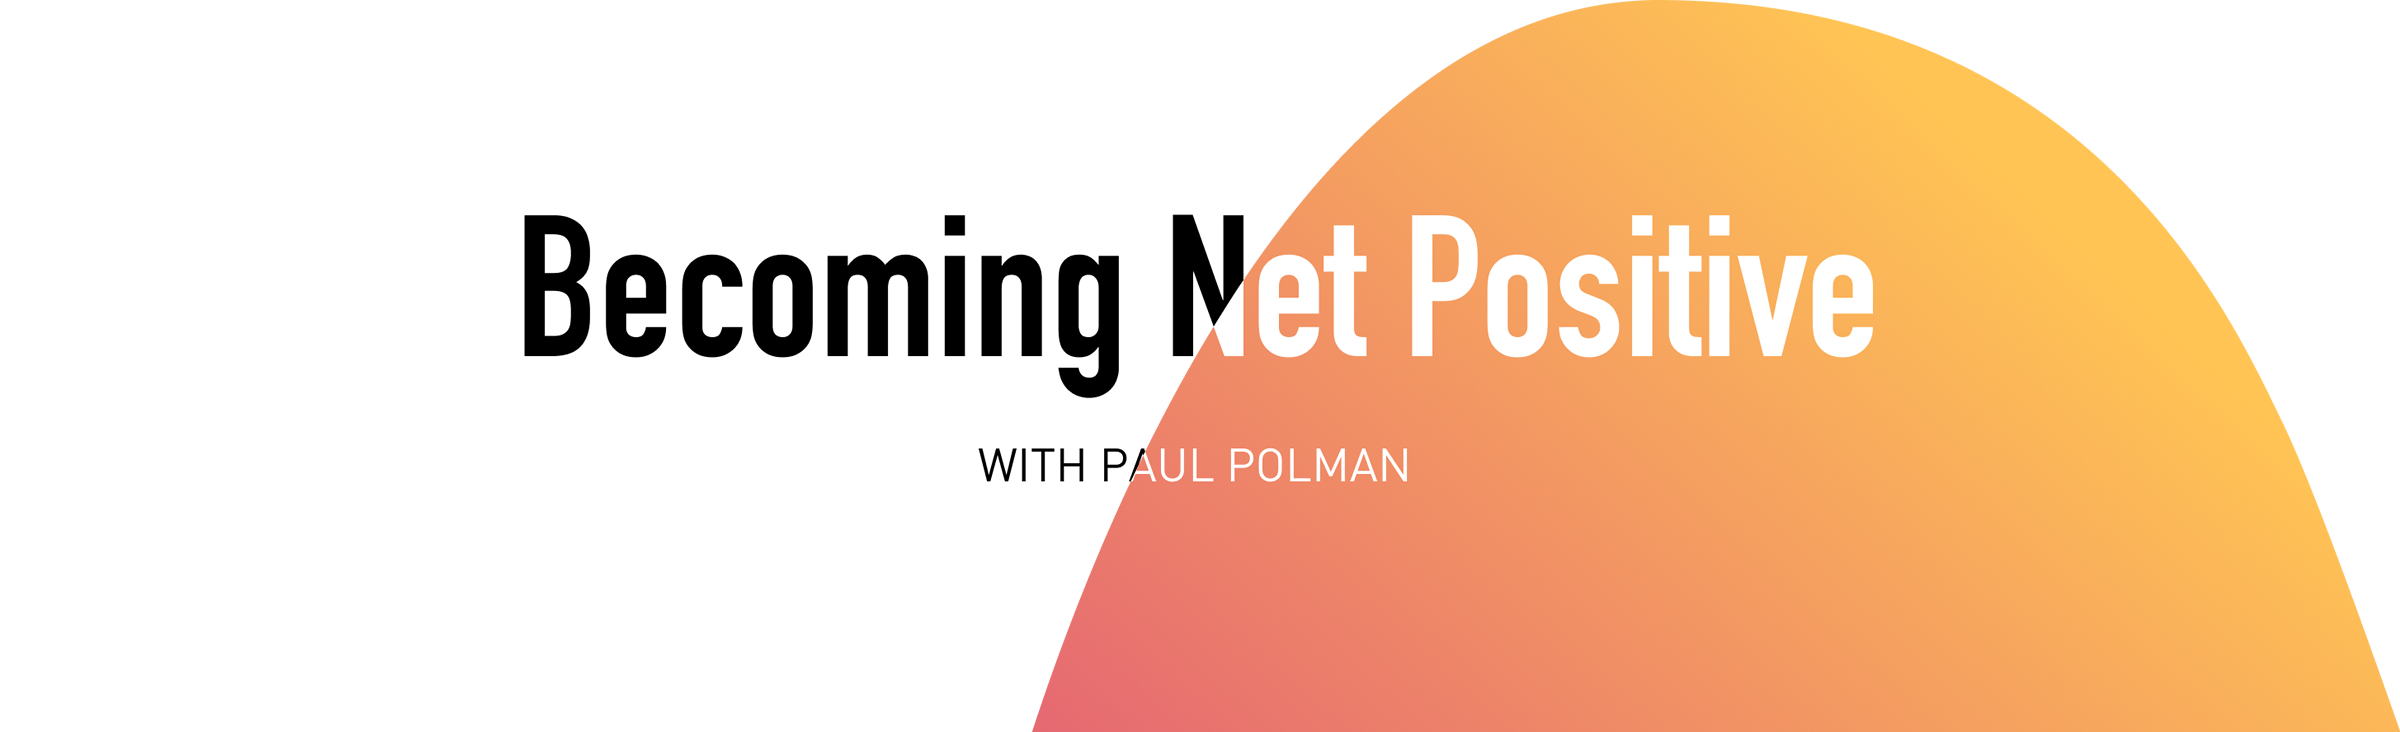 Becoming Net Positive with Paul Polman